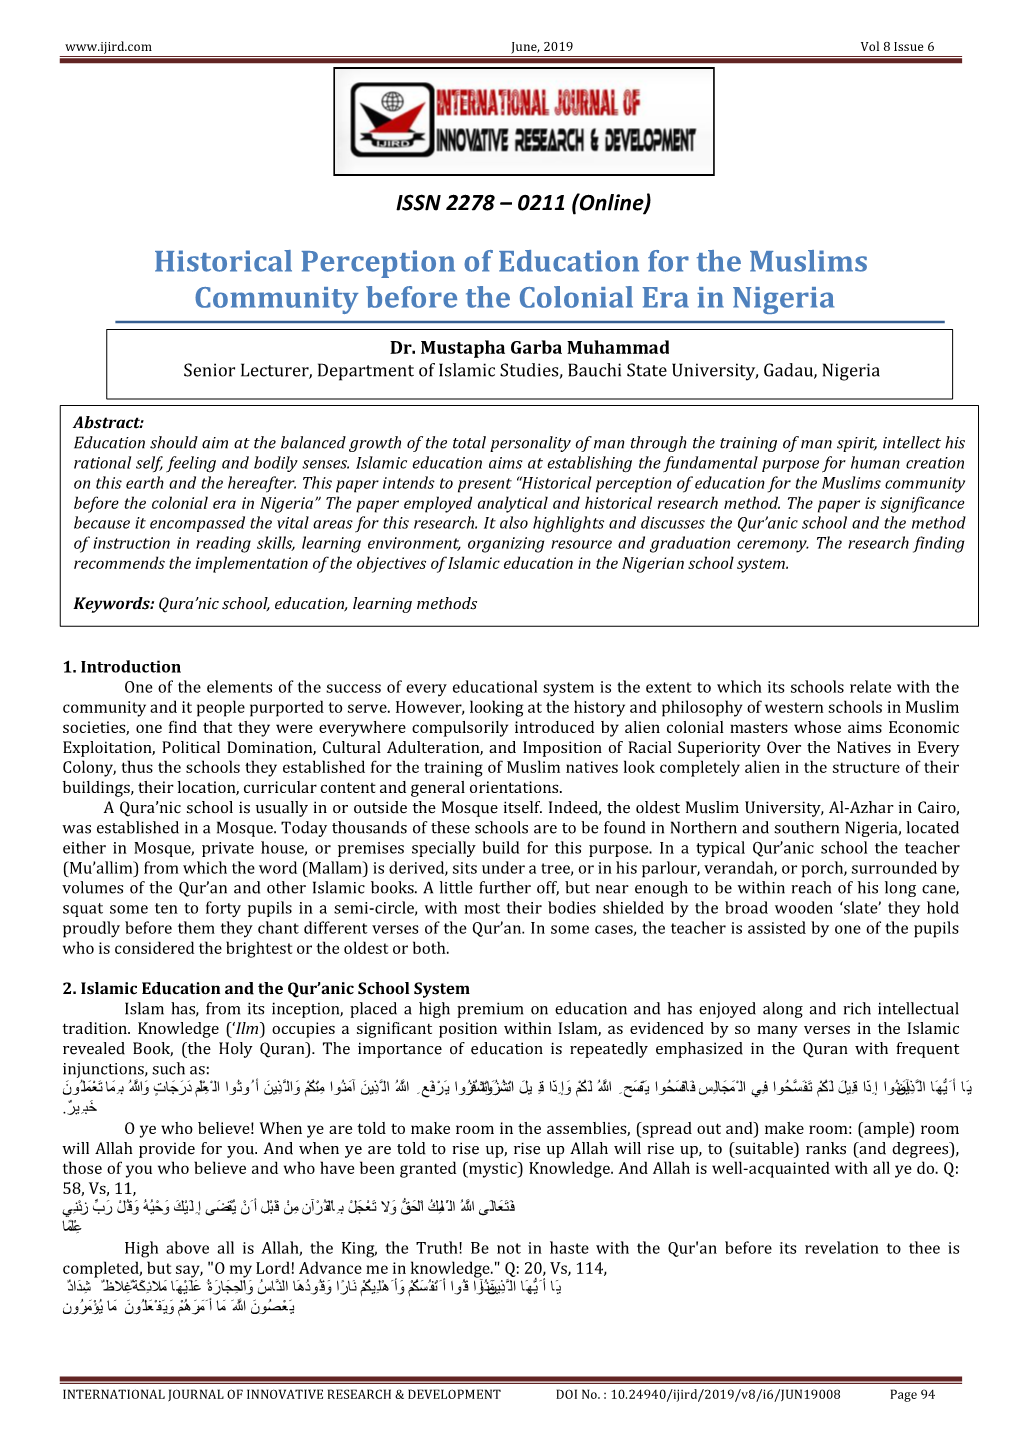 Historical Perception of Education for the Muslims Community Before the Colonial Era in Nigeria